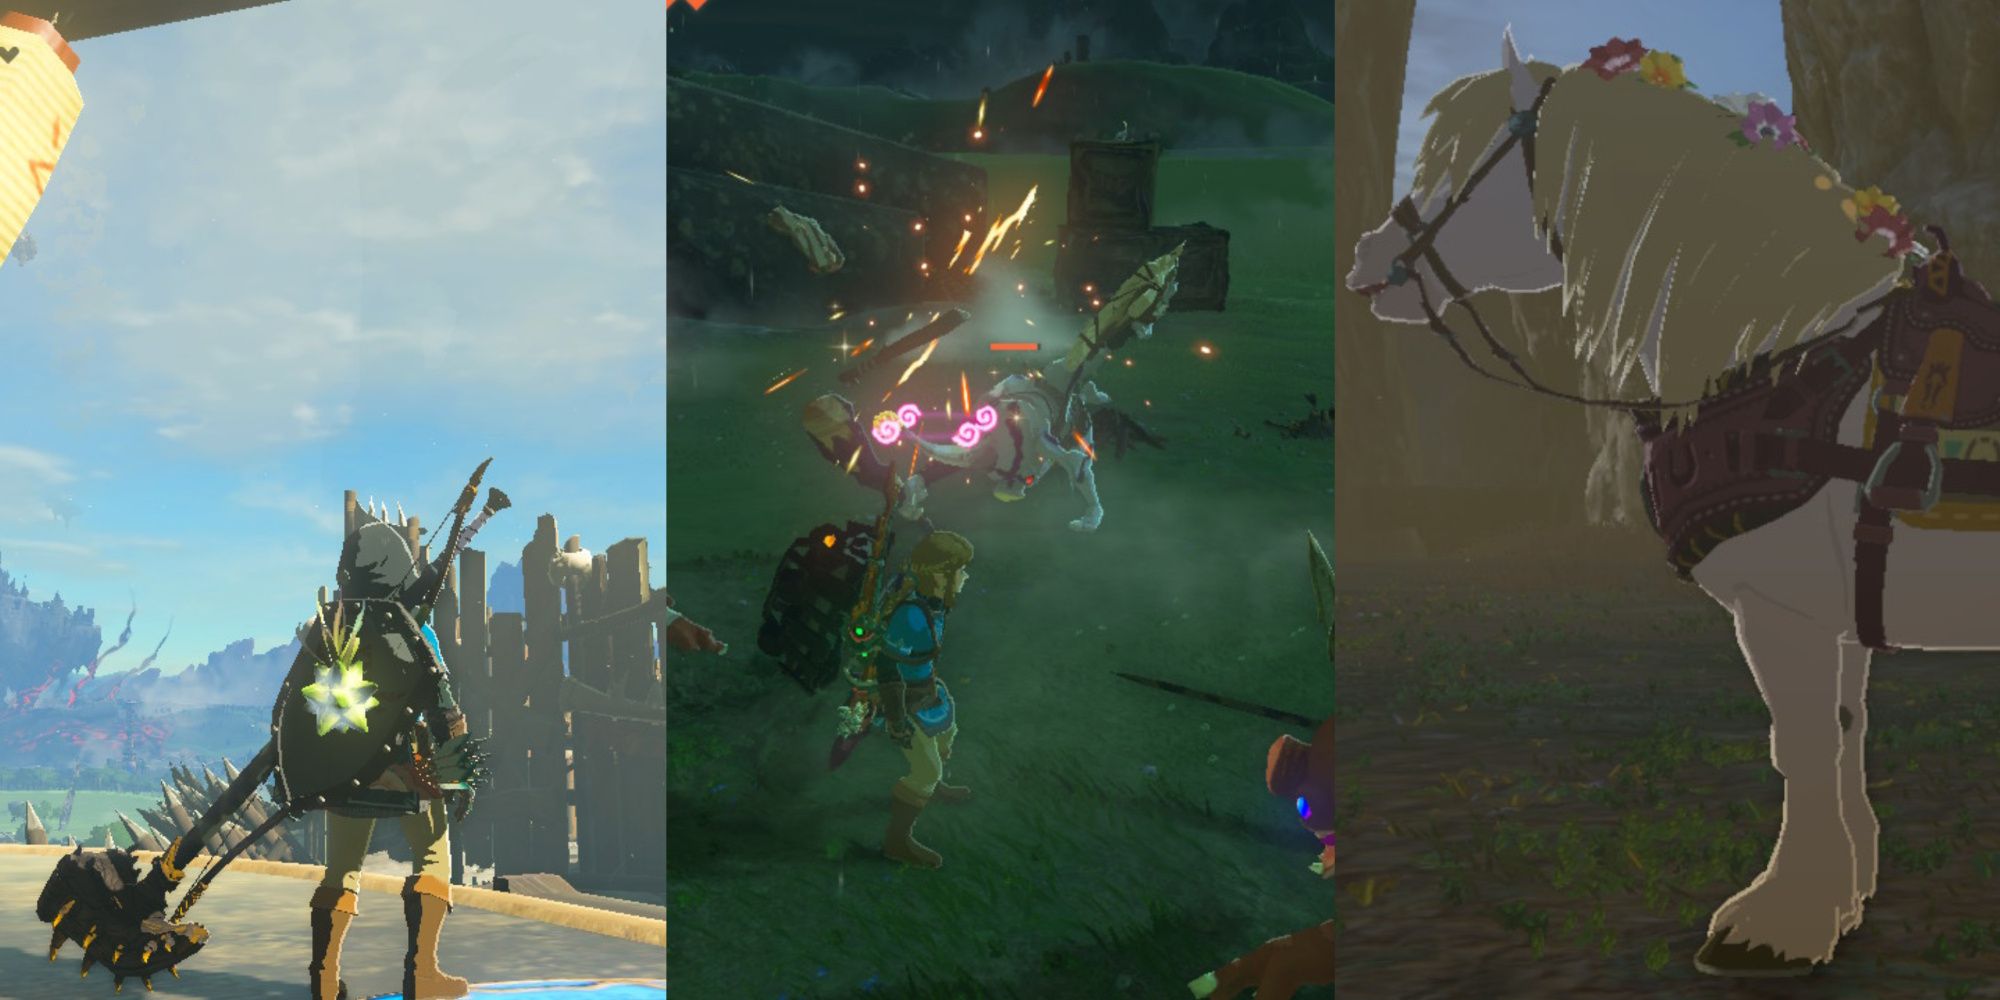 a dazzlefruit fused to a shield, the effects of a muddlebud on a silver bokoblin, and a horse wearing the towing harness